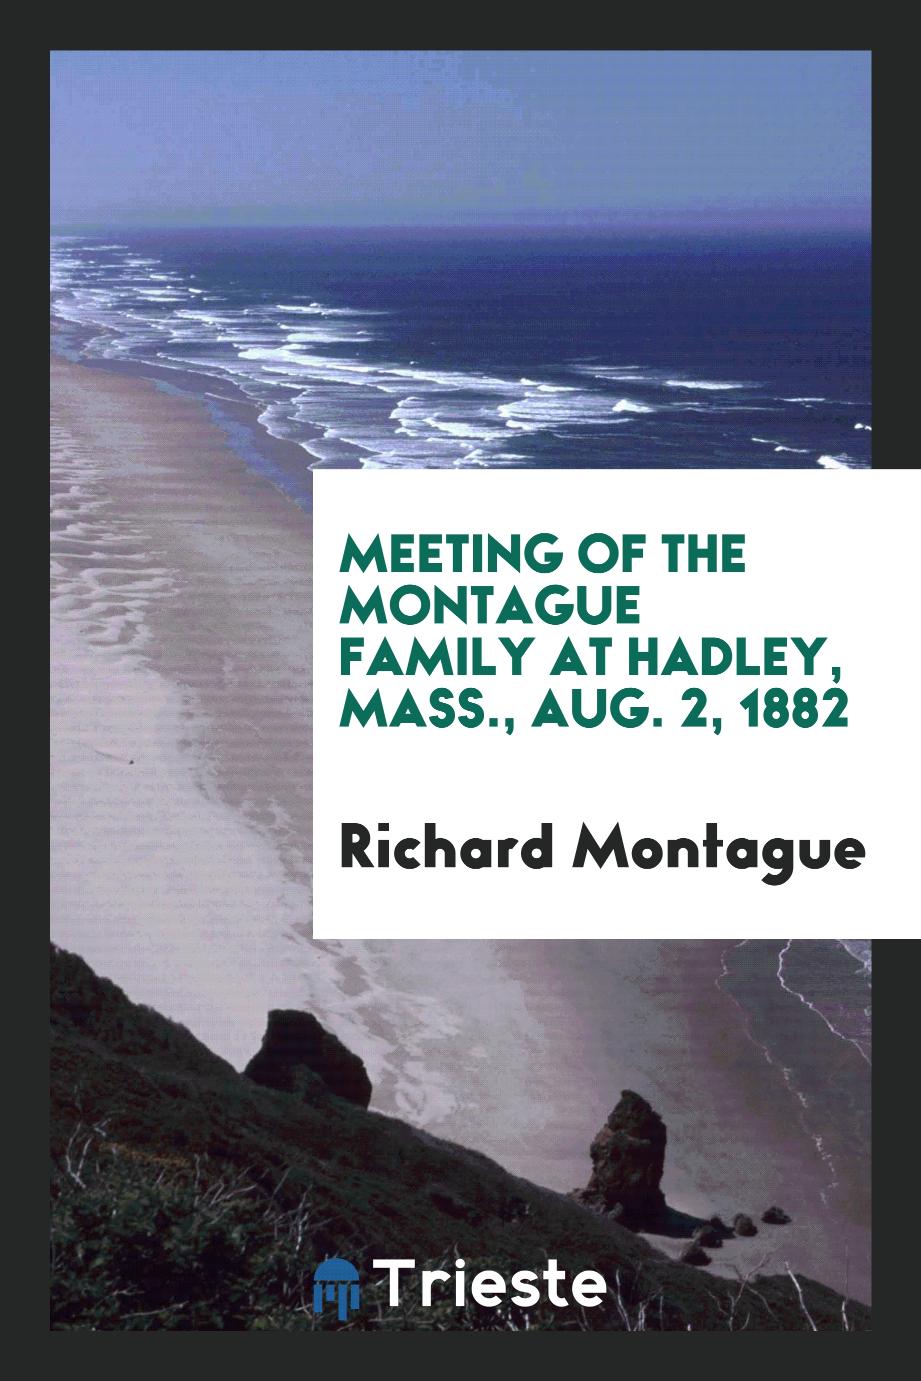 Meeting of the Montague family at Hadley, Mass., Aug. 2, 1882